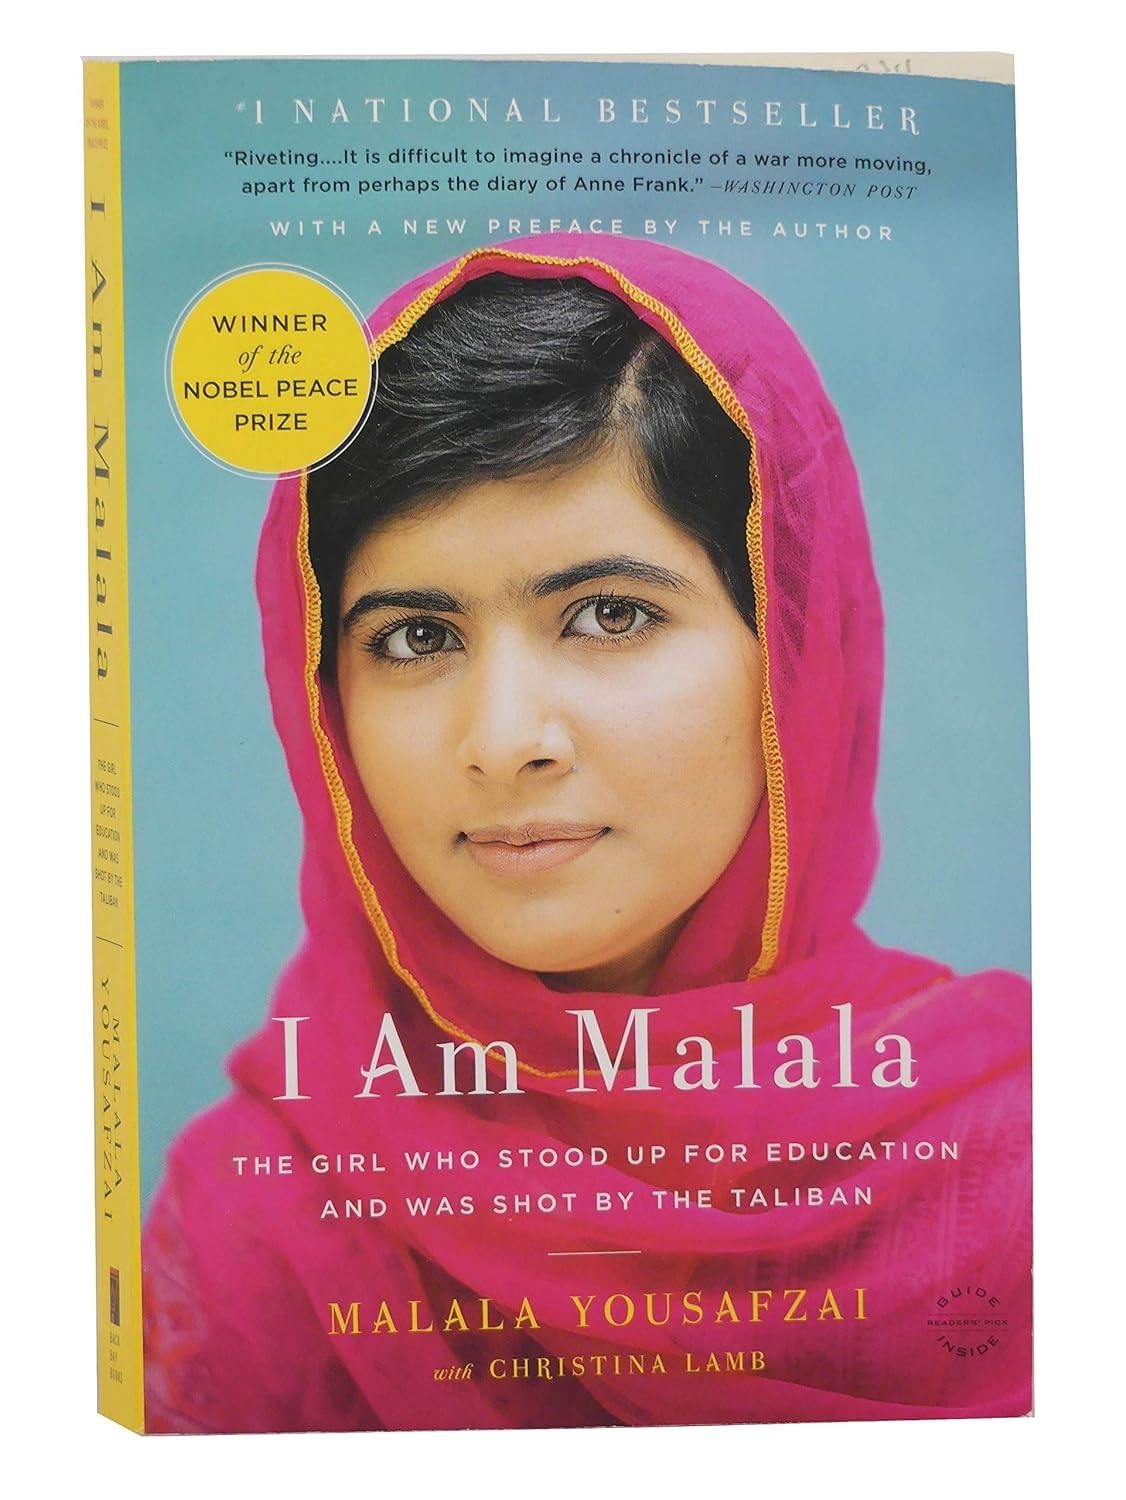 I Am Malala The Girl Who Stood Up for Education and Was Shot by the Taliban by Malala Yousafzai (2013)